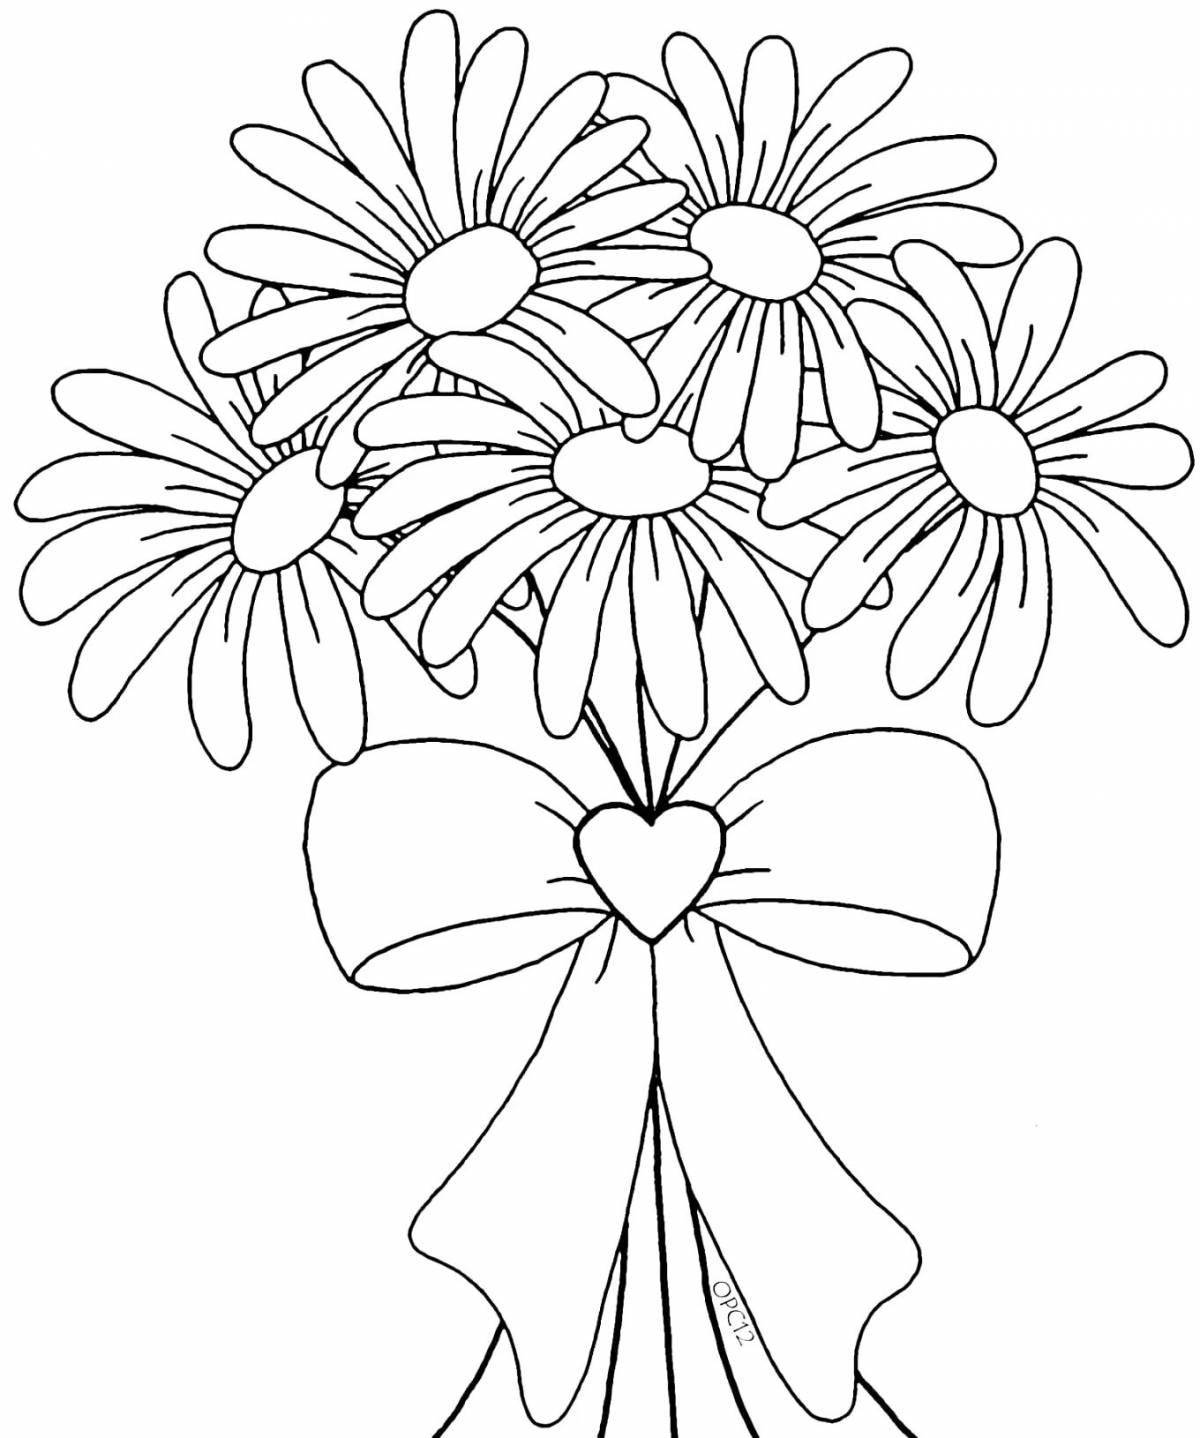 Coloring beautiful bouquet of daisies